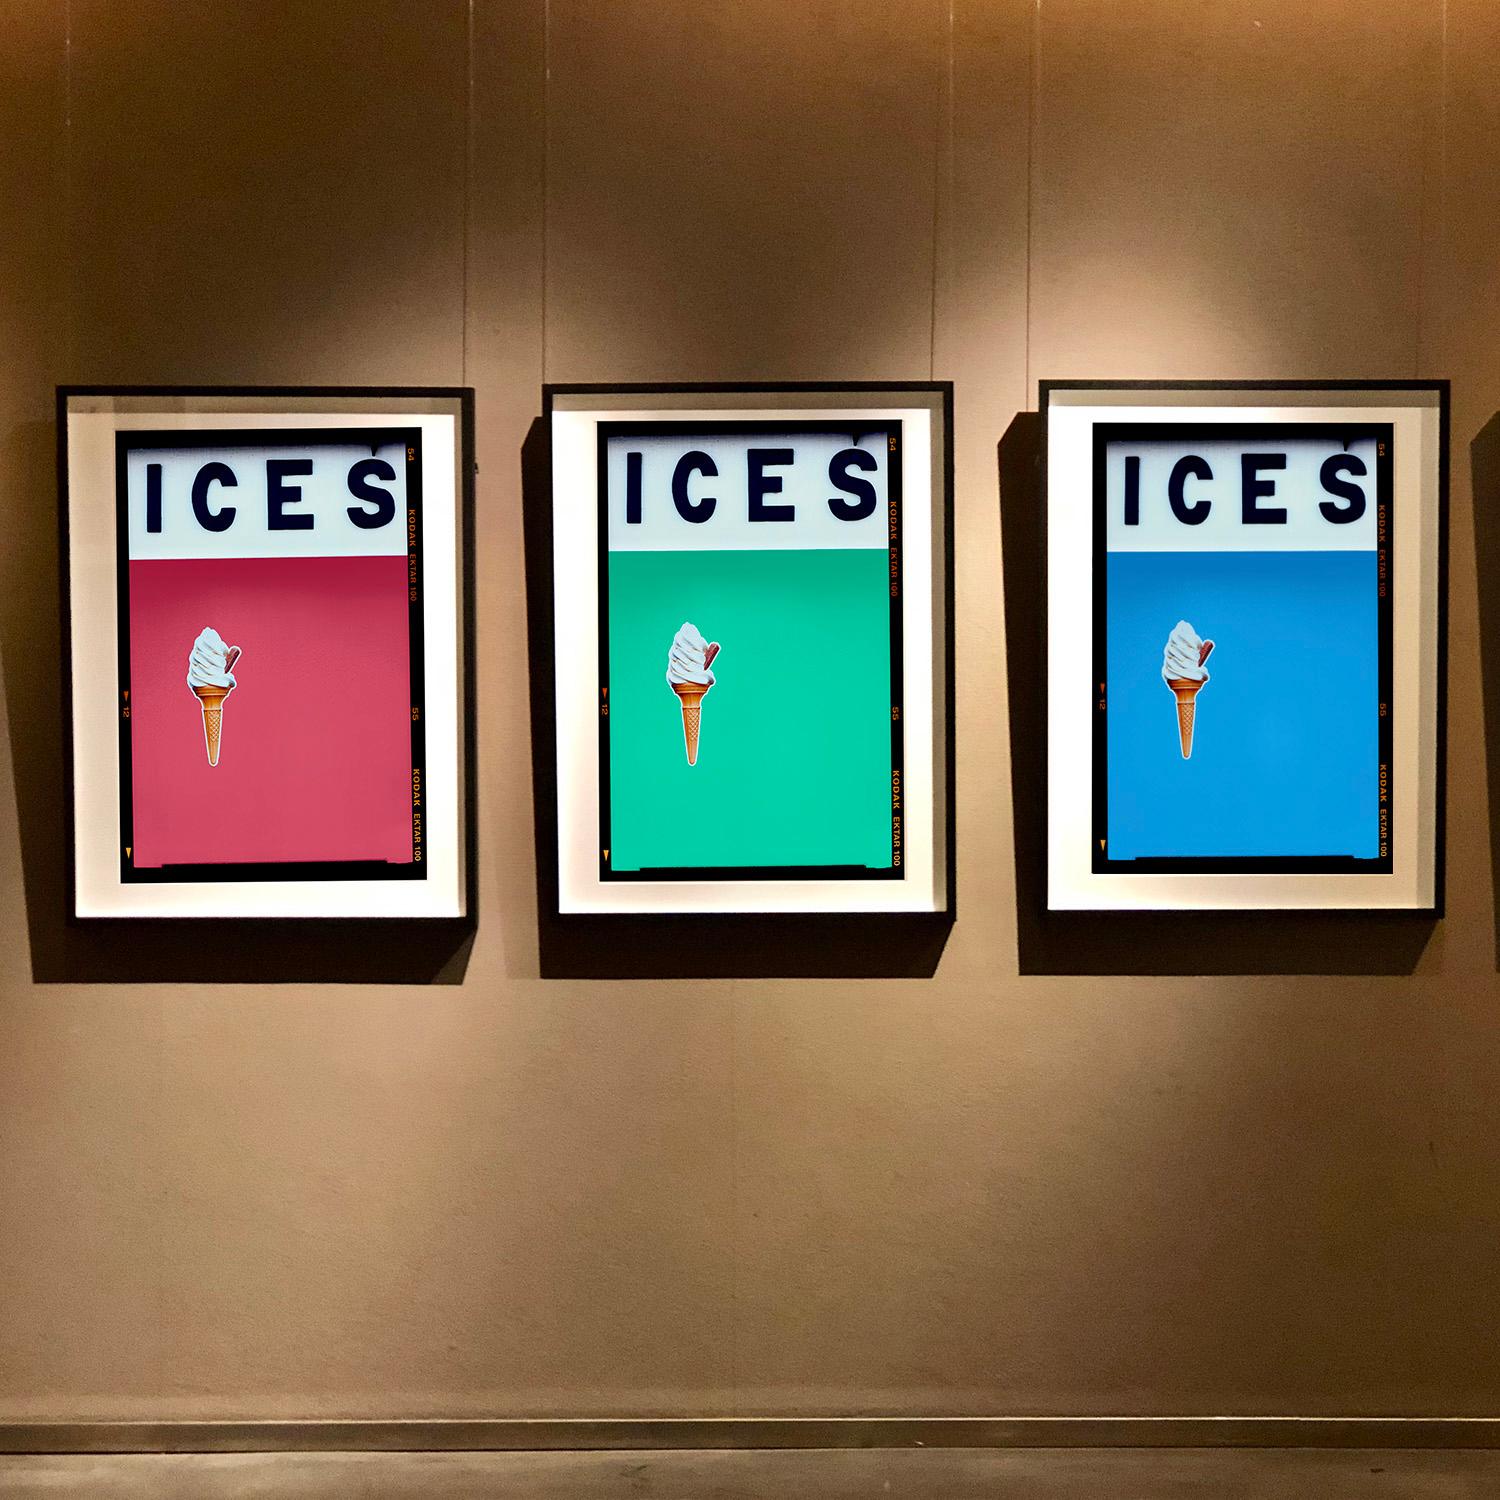 ICES, by Richard Heeps, photographed at the British Seaside at the end of summer 2020. This artwork is about evoking memories of the simple joy of days by the beach. The light blue color blocking, typography and the surreal twist of the suspended